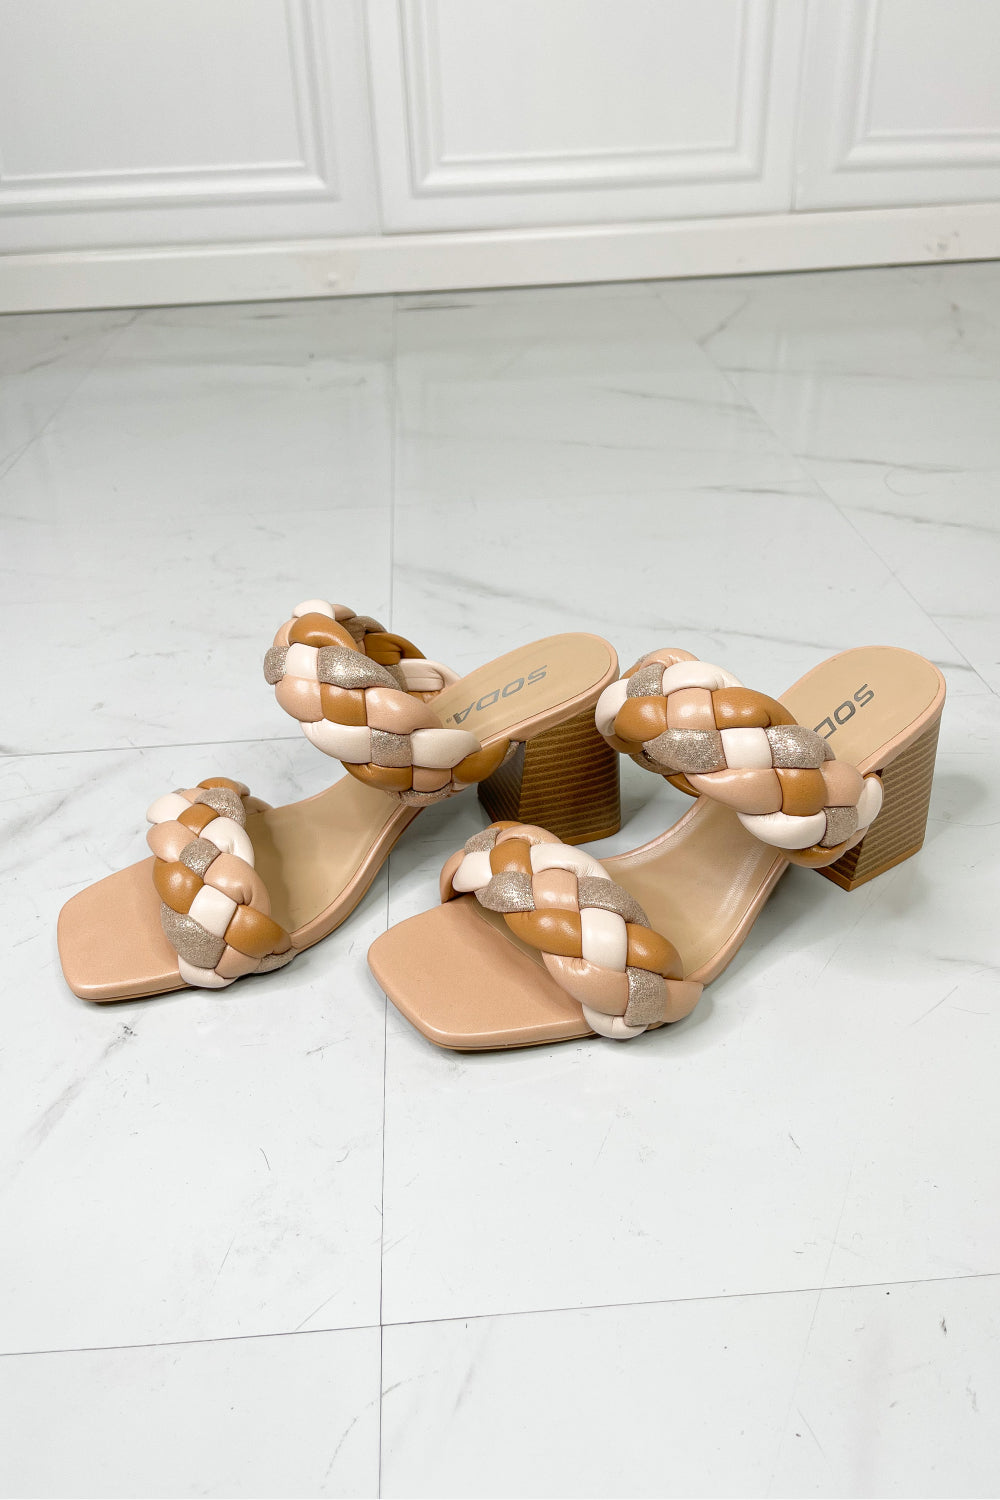 SODA Interwoven Ideas Braided Strap Block Heel Slide Sandal in Nude  Southern Soul Collectives 